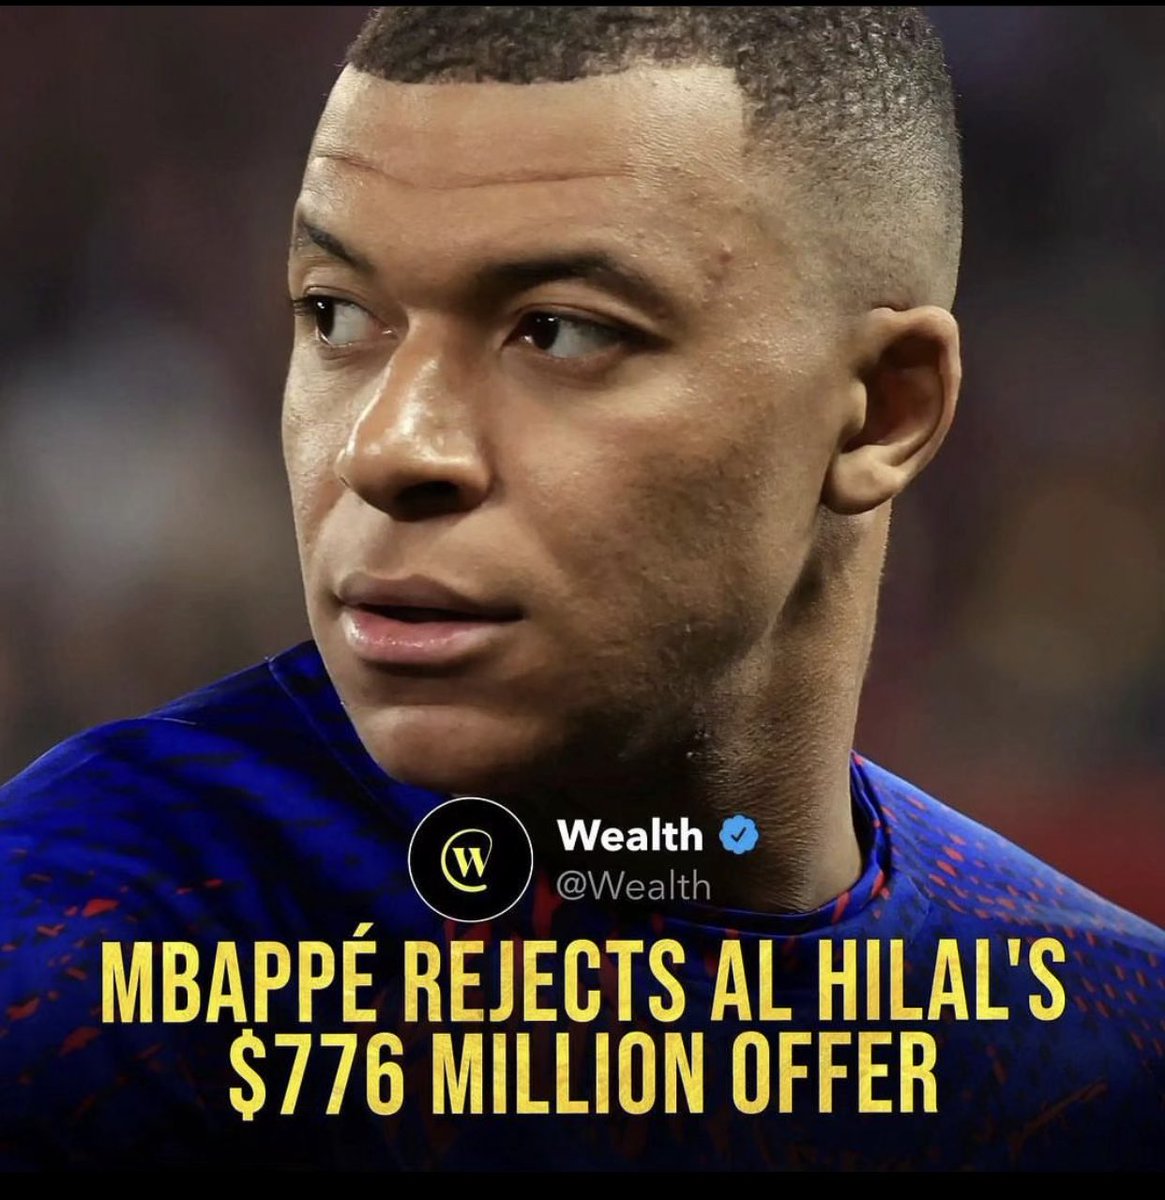 Kylian Mbappe, the football superstar from Paris Saint-Germin, has turned down an offer from Al Hilal, a club in the Saudi Professional League, despite being offered a whooping $776 million contract….

#socceragent #footballbusiness #sport #league